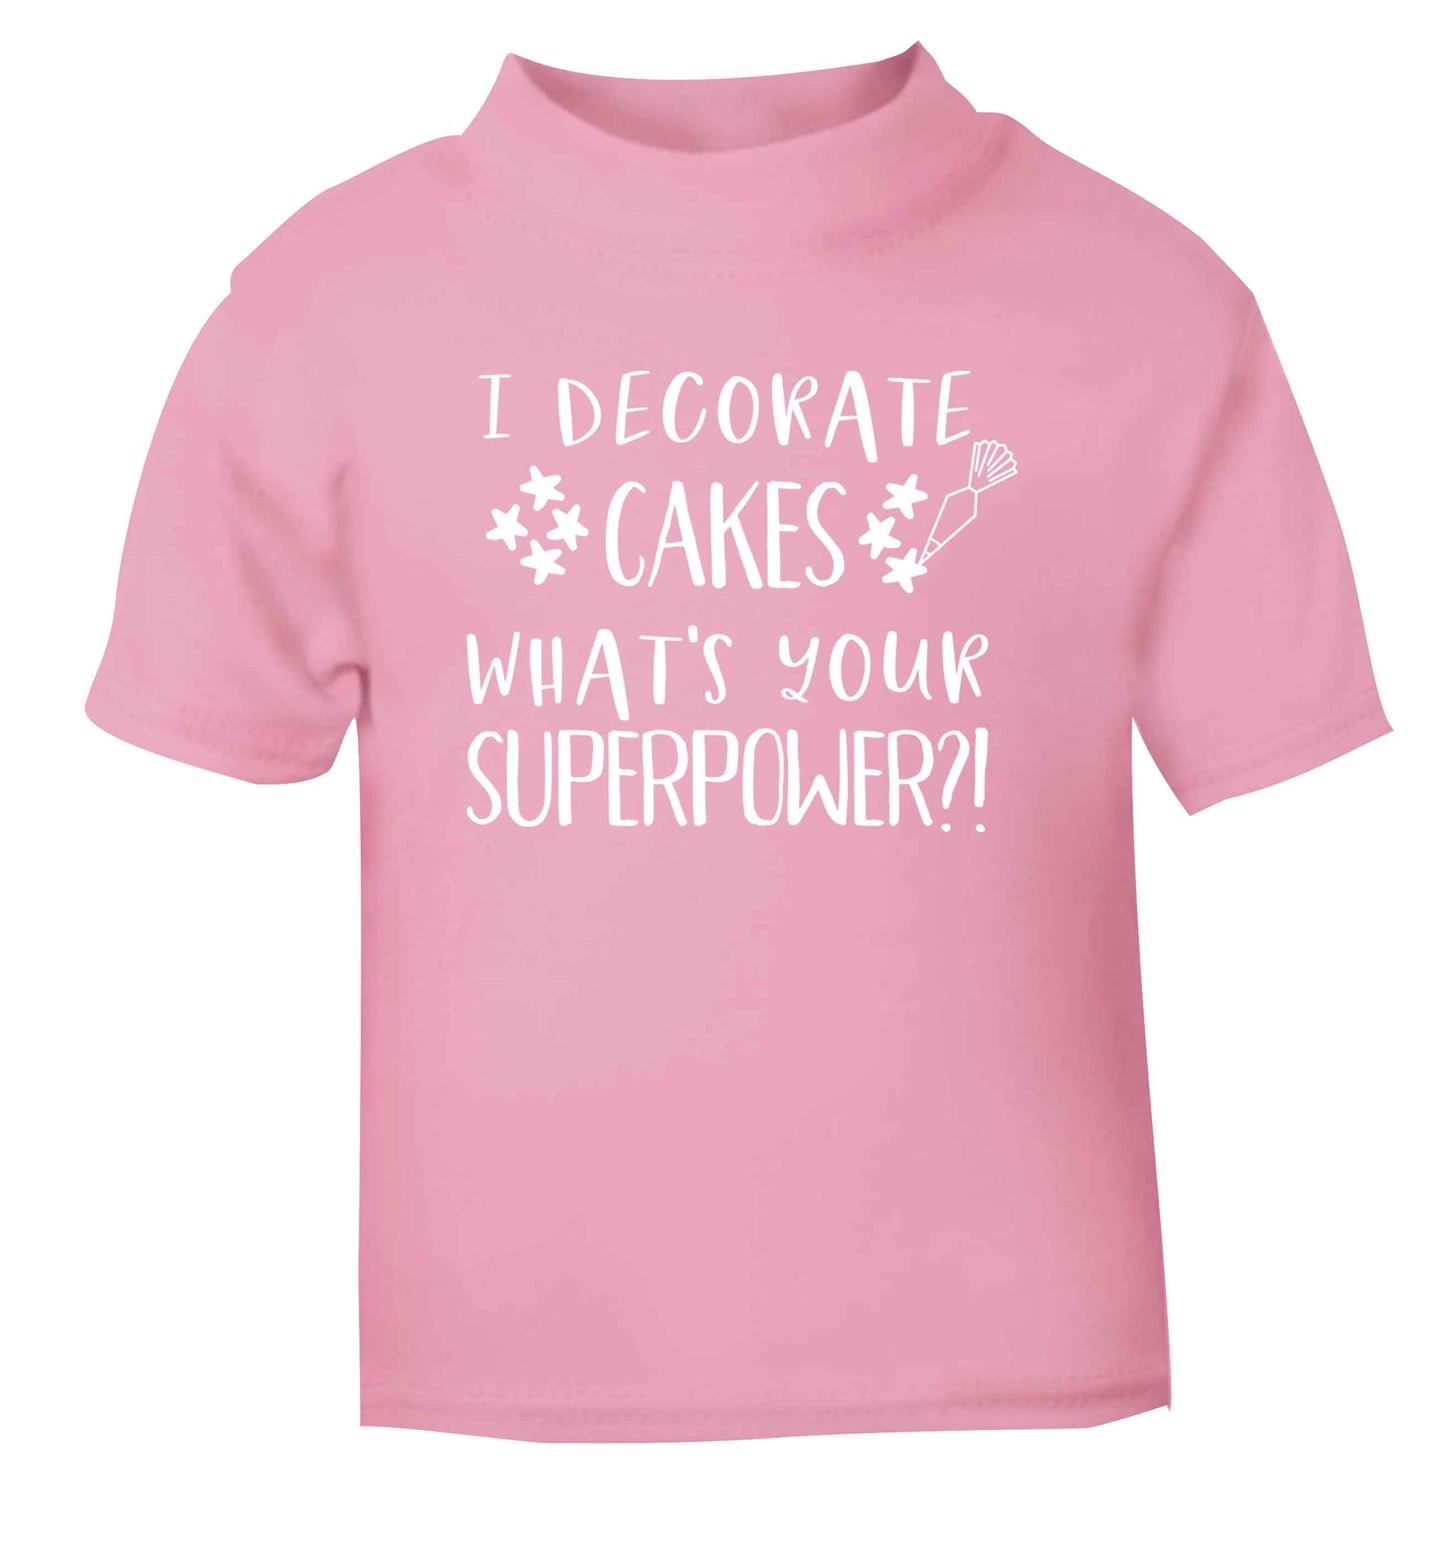 I decorate cakes what's your superpower?! light pink Baby Toddler Tshirt 2 Years